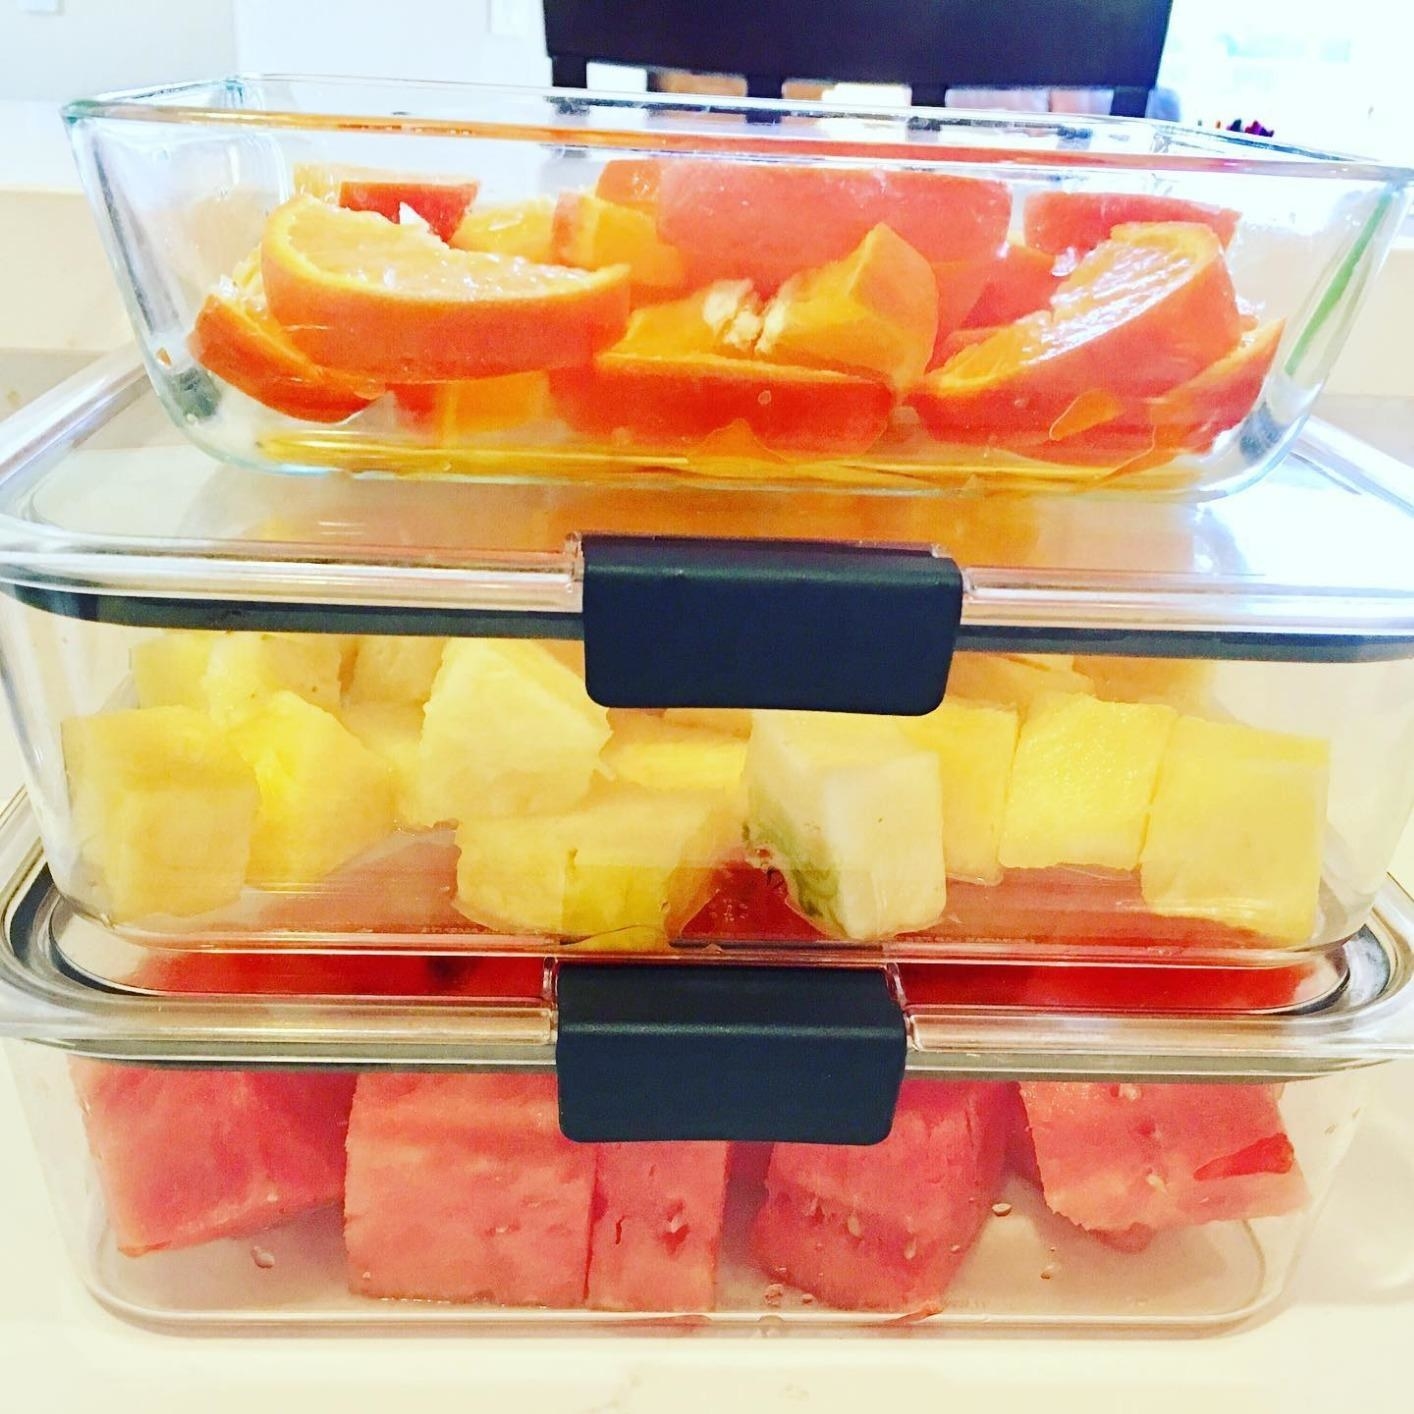 A reviewer showing slices watermelon, oranges, and pineapple inside three of the containers